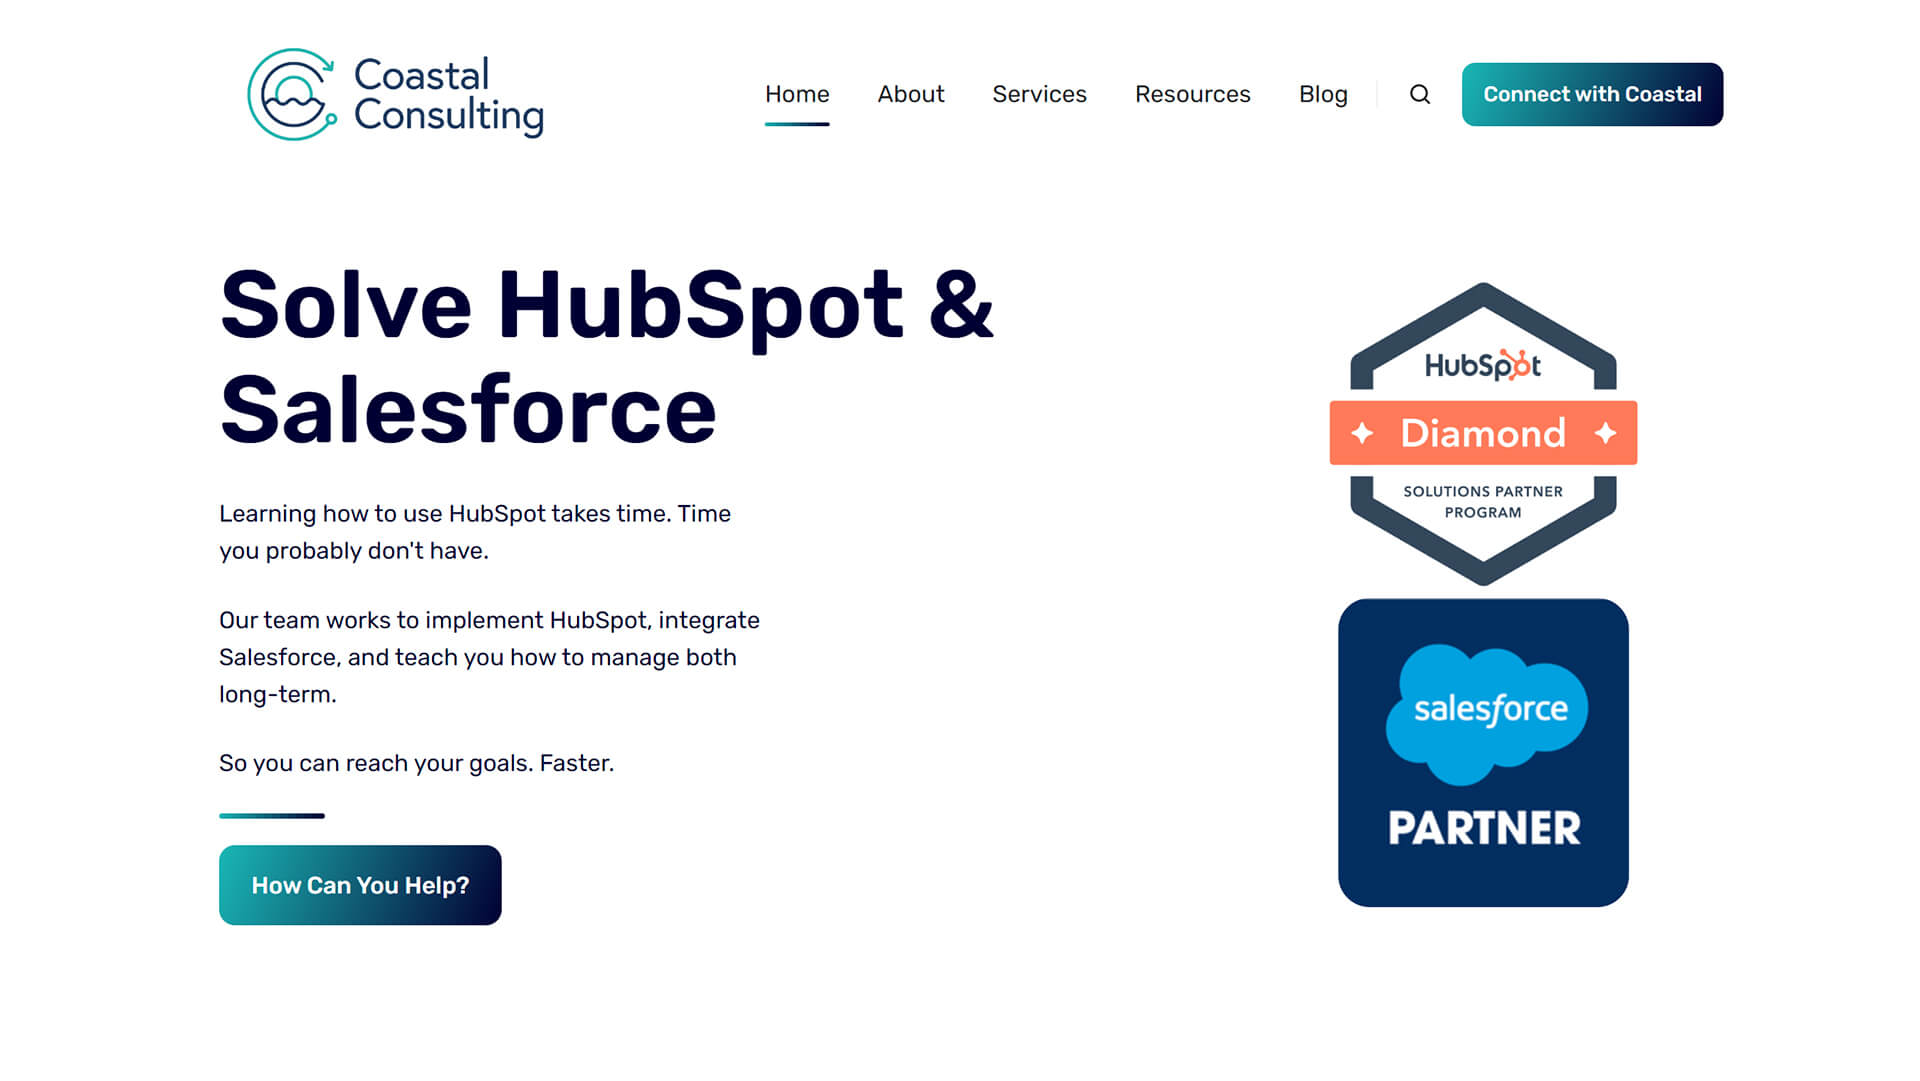 The beautiful coastalconsulting.co website created with Act3 on the HubSpot CMS